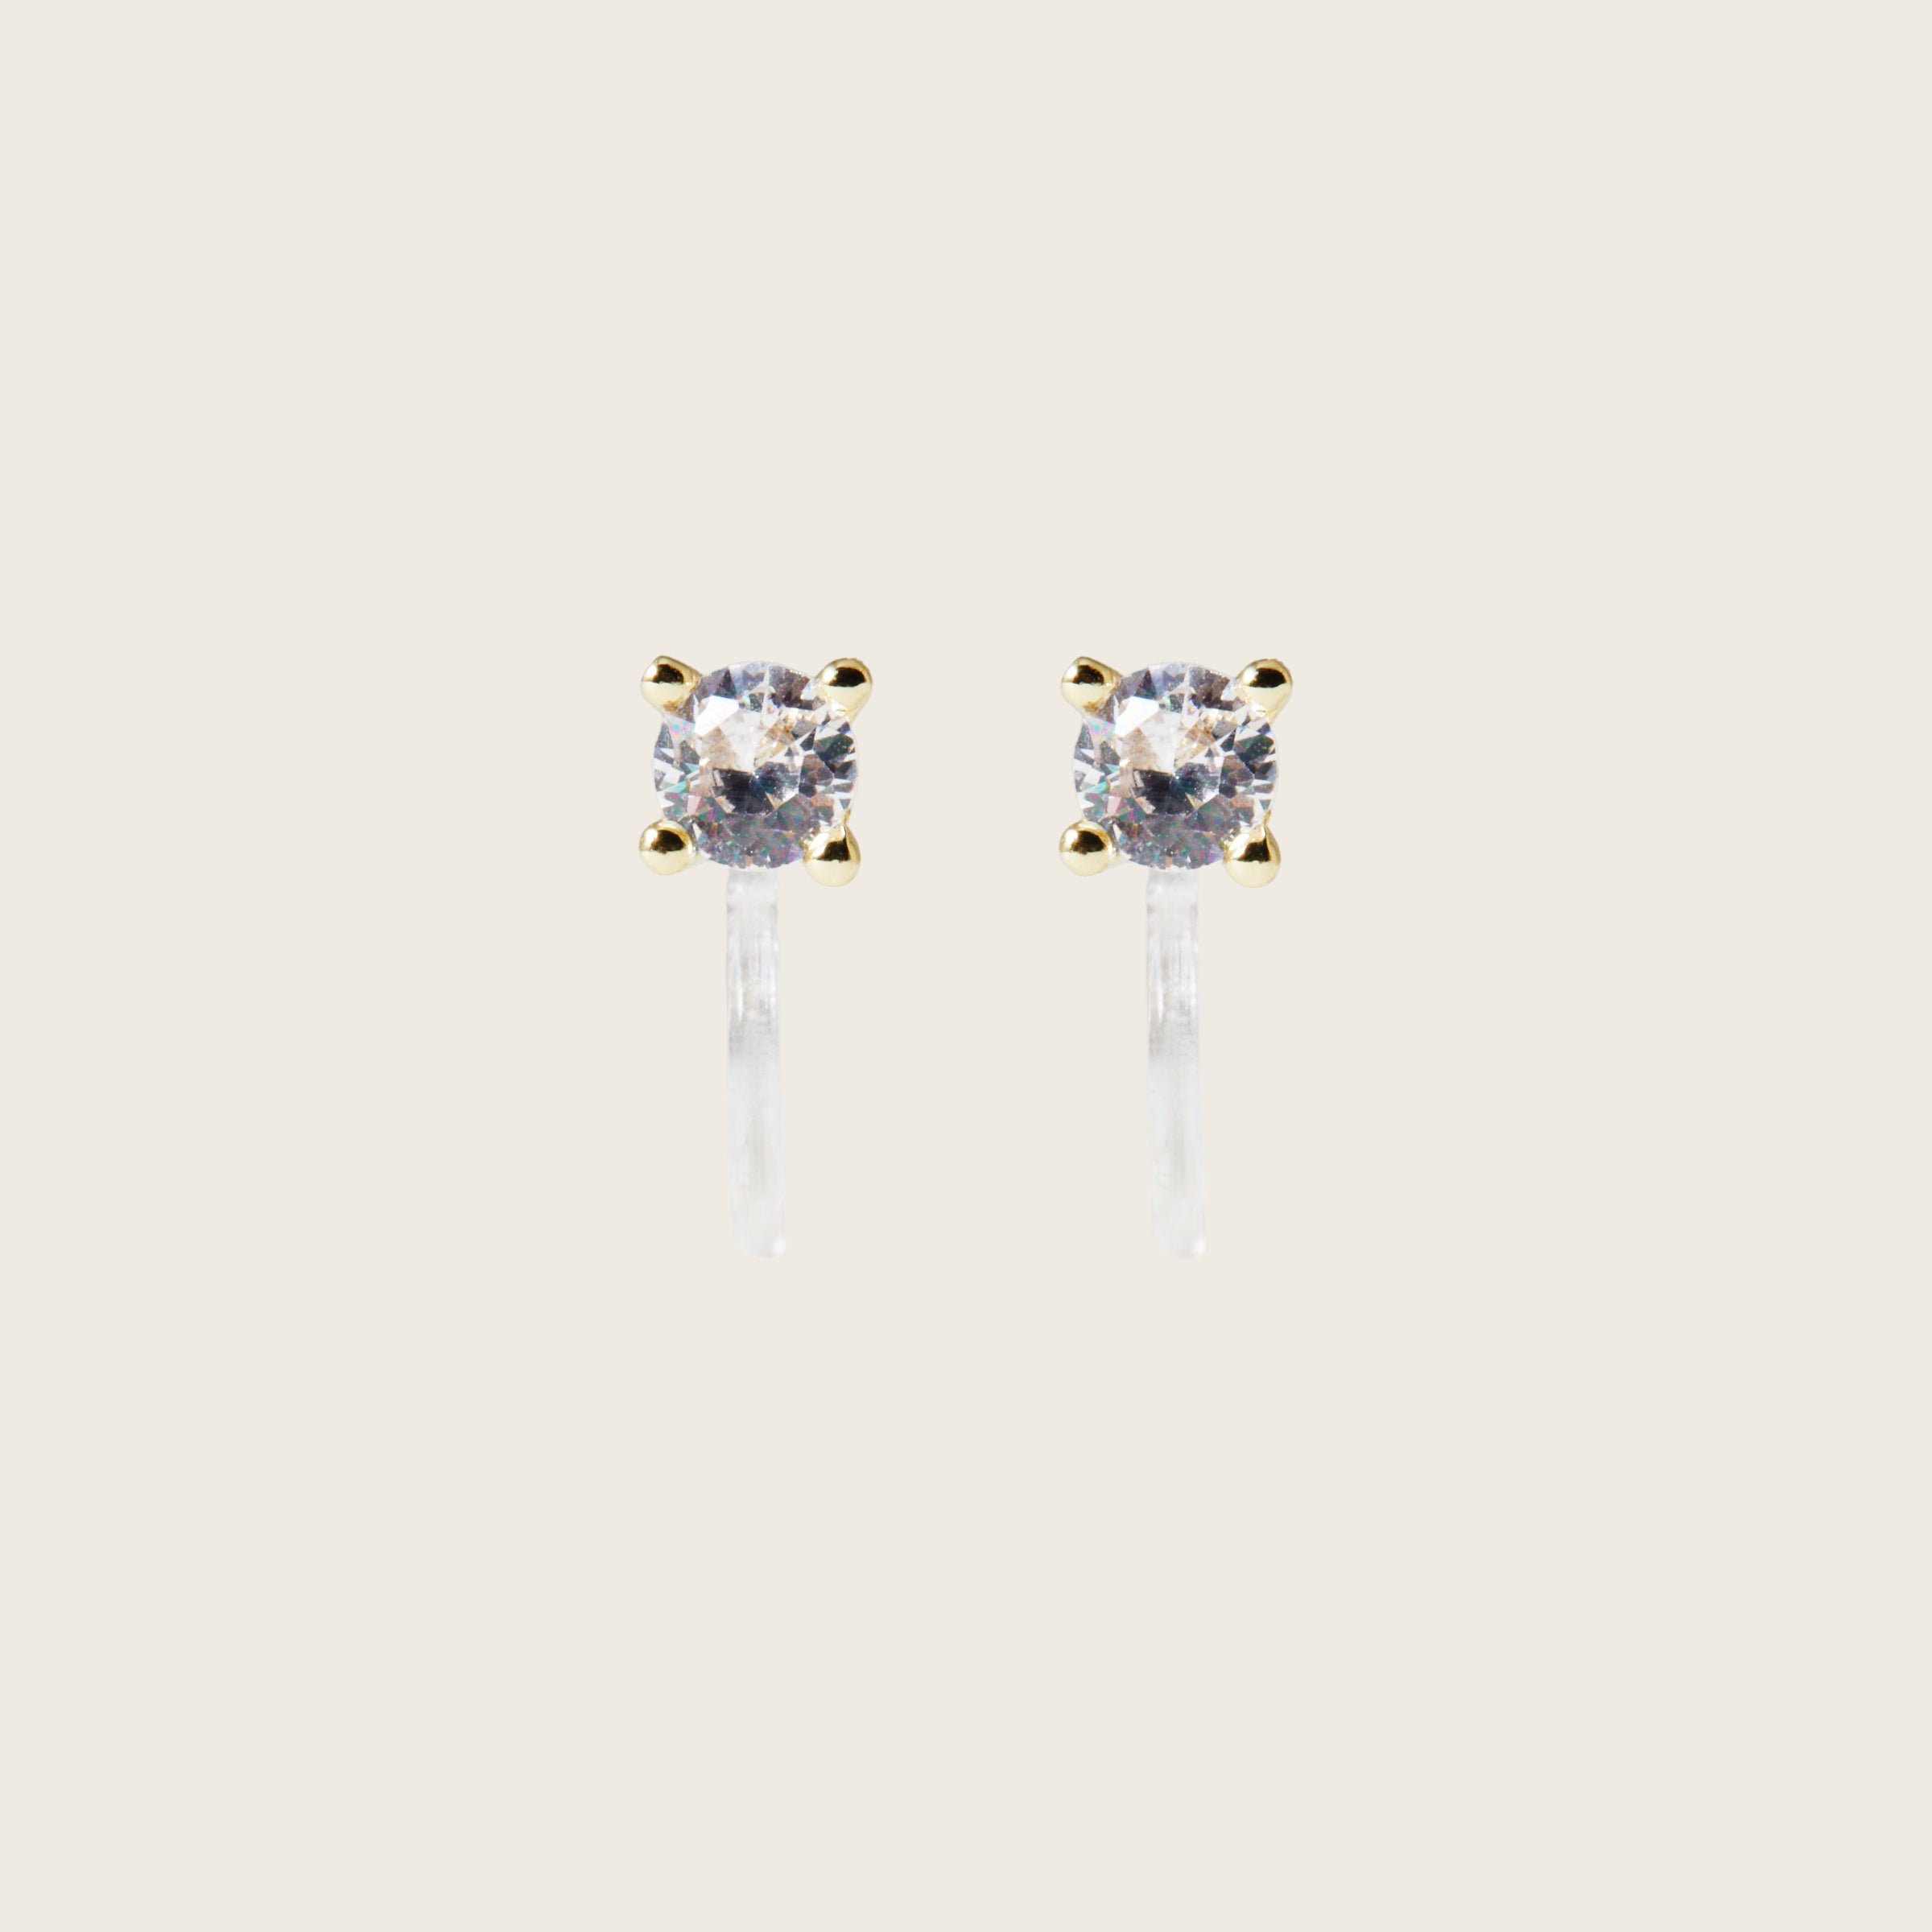 Image of the Mini Stud Clip-On Earrings possess a resin clip-on closure, making them suitable for a variety of ear types and offering a medium secure hold for comfortable wear lasting 8-12 hours. Please note that this item is a single pair.